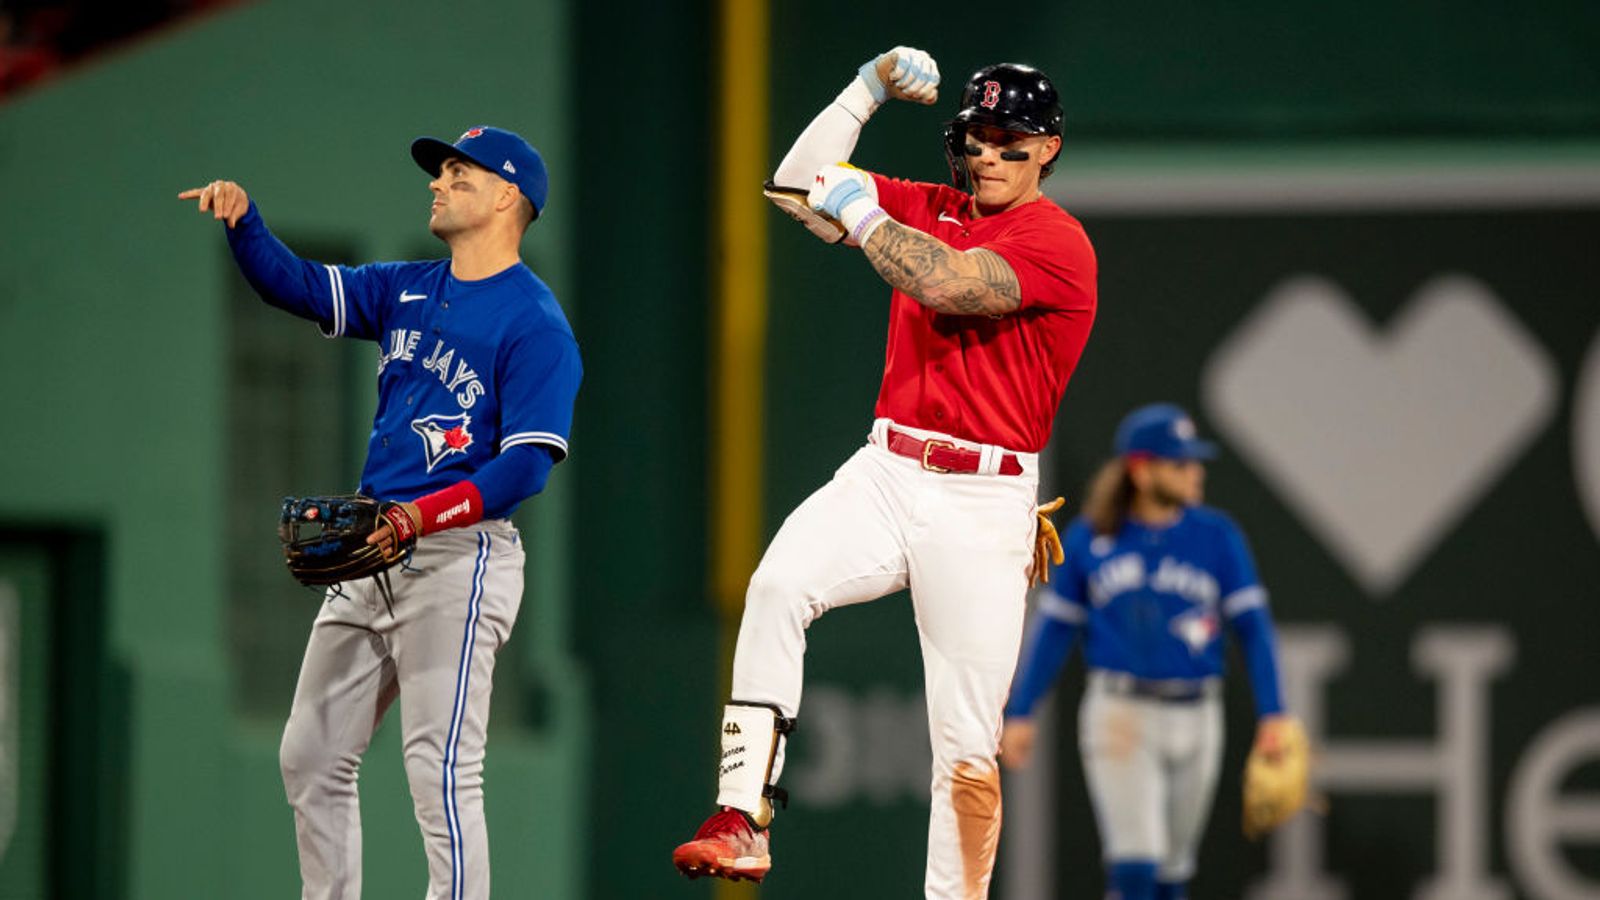 Boston Red Sox bring out the brooms, sweep Toronto Blue Jays again